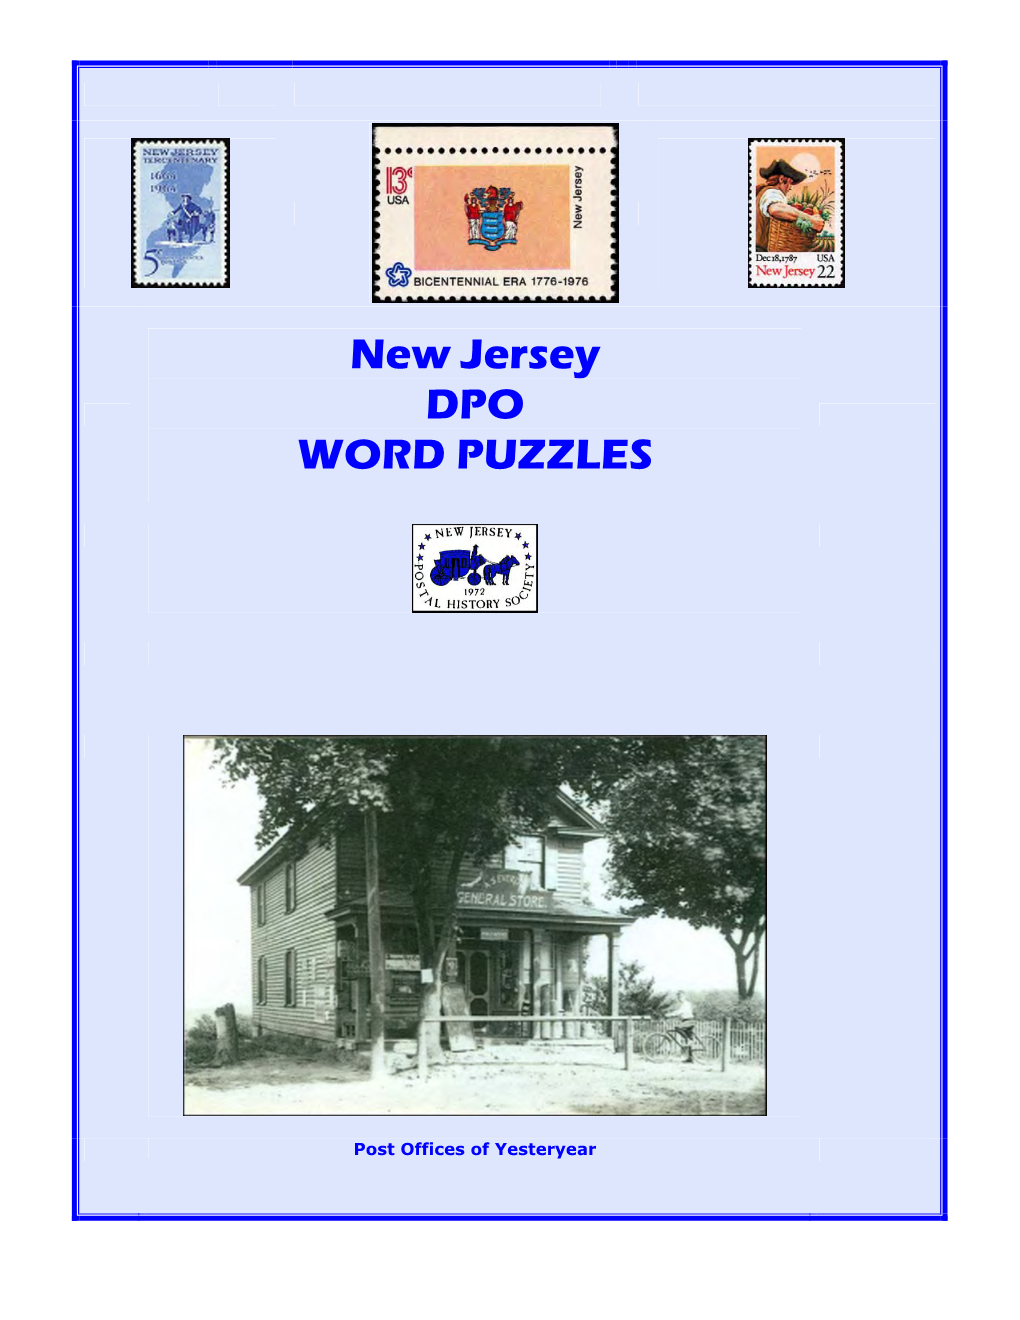 New Jersey DPO WORD PUZZLES